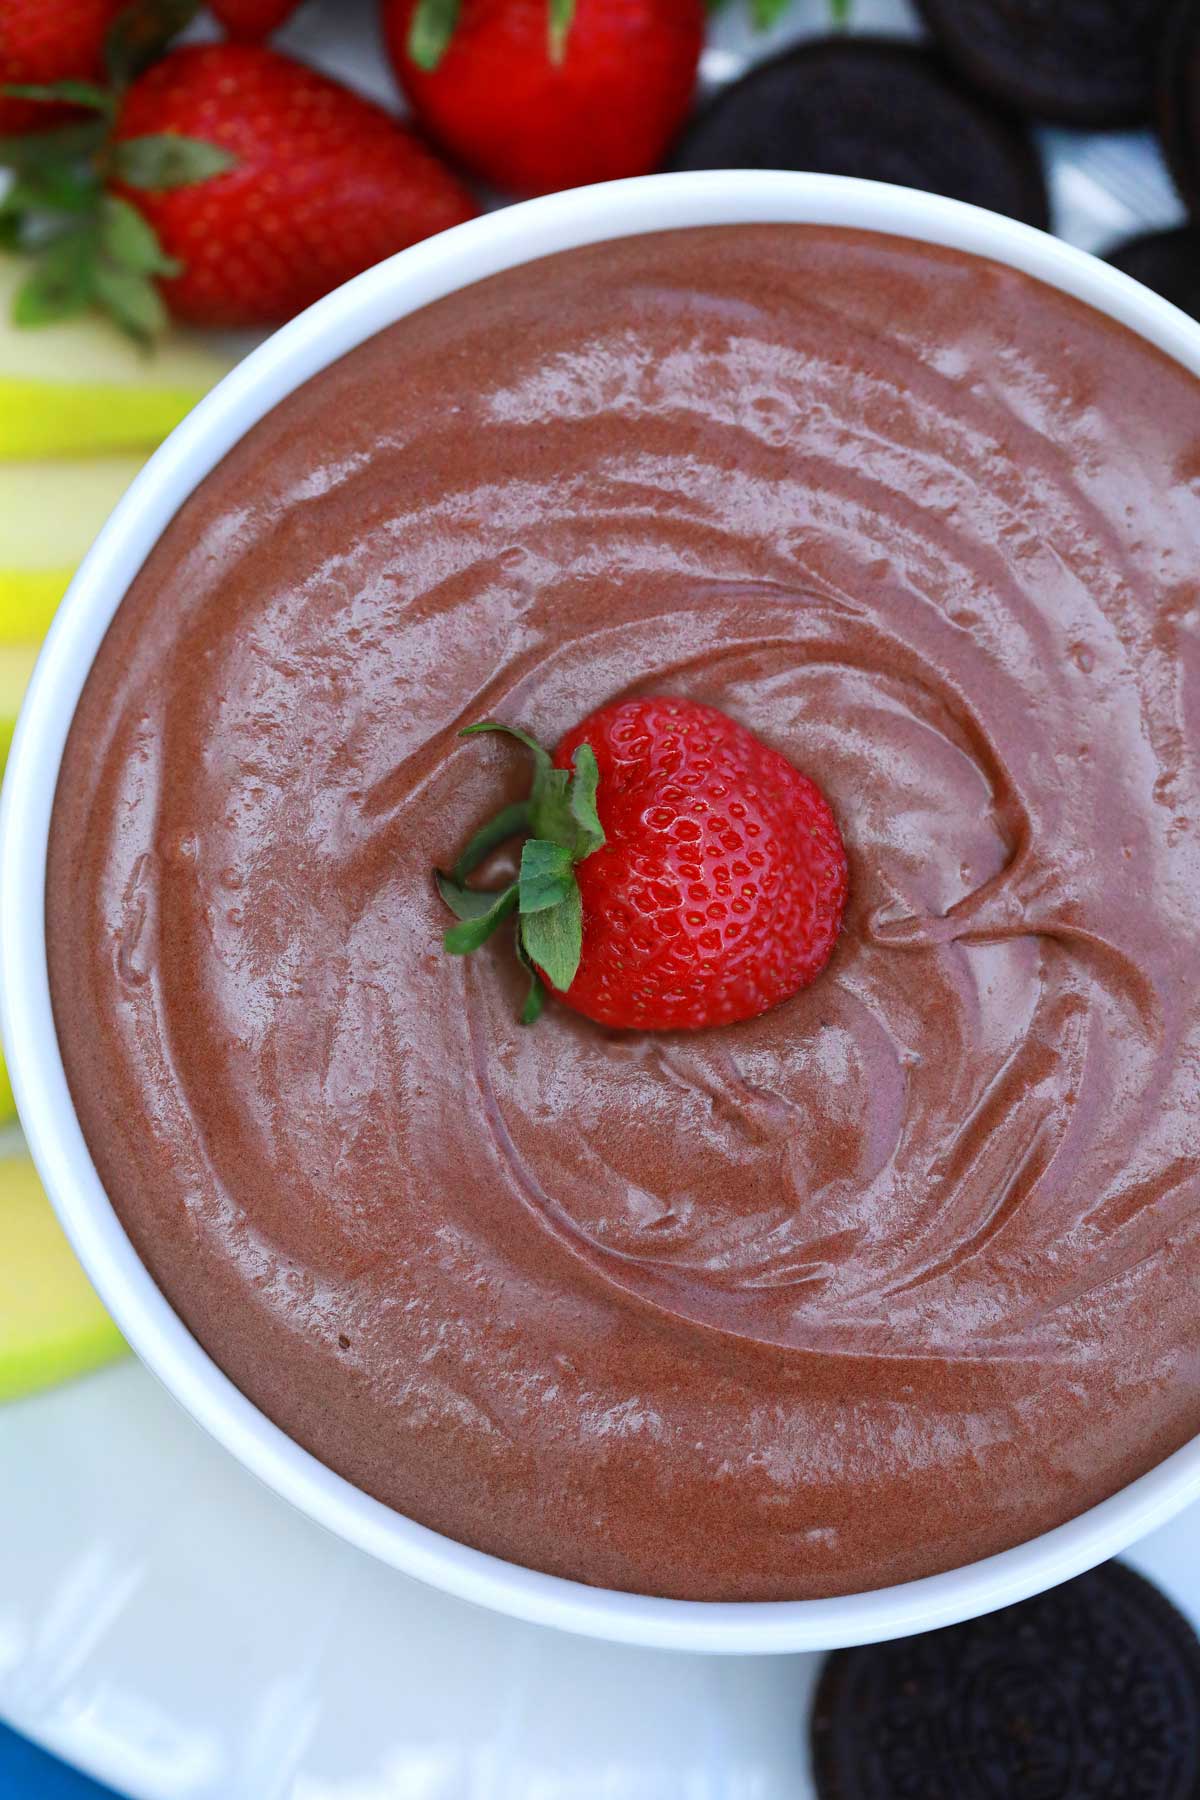 Chocolate dessert dip in bowl with strawberry